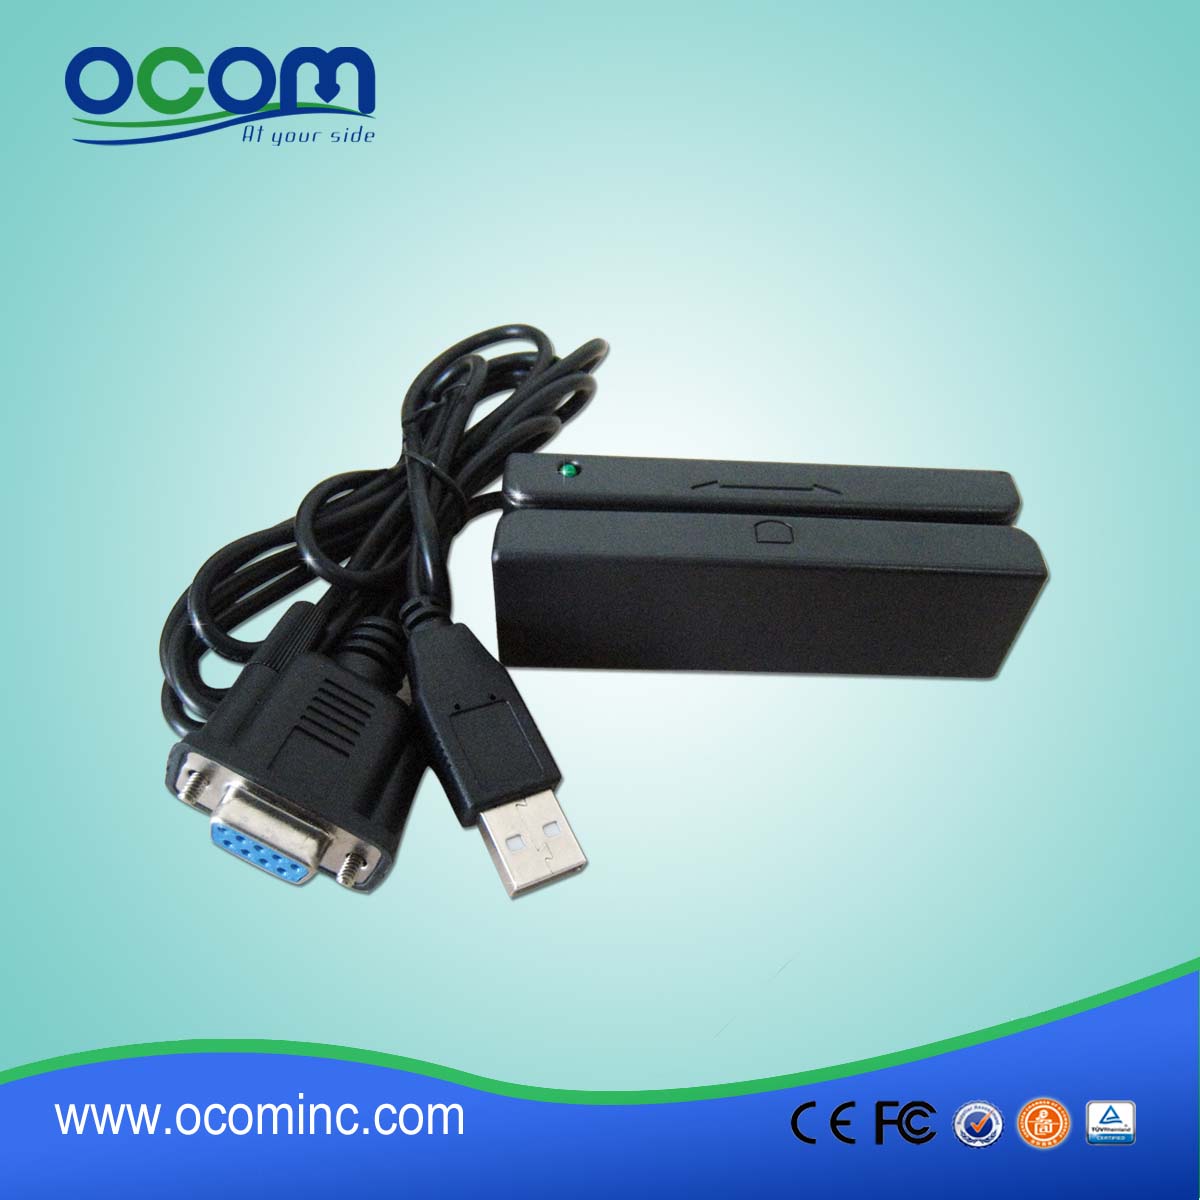 CR1300 Small msr magnetic stripe card reader for GPS Tracking